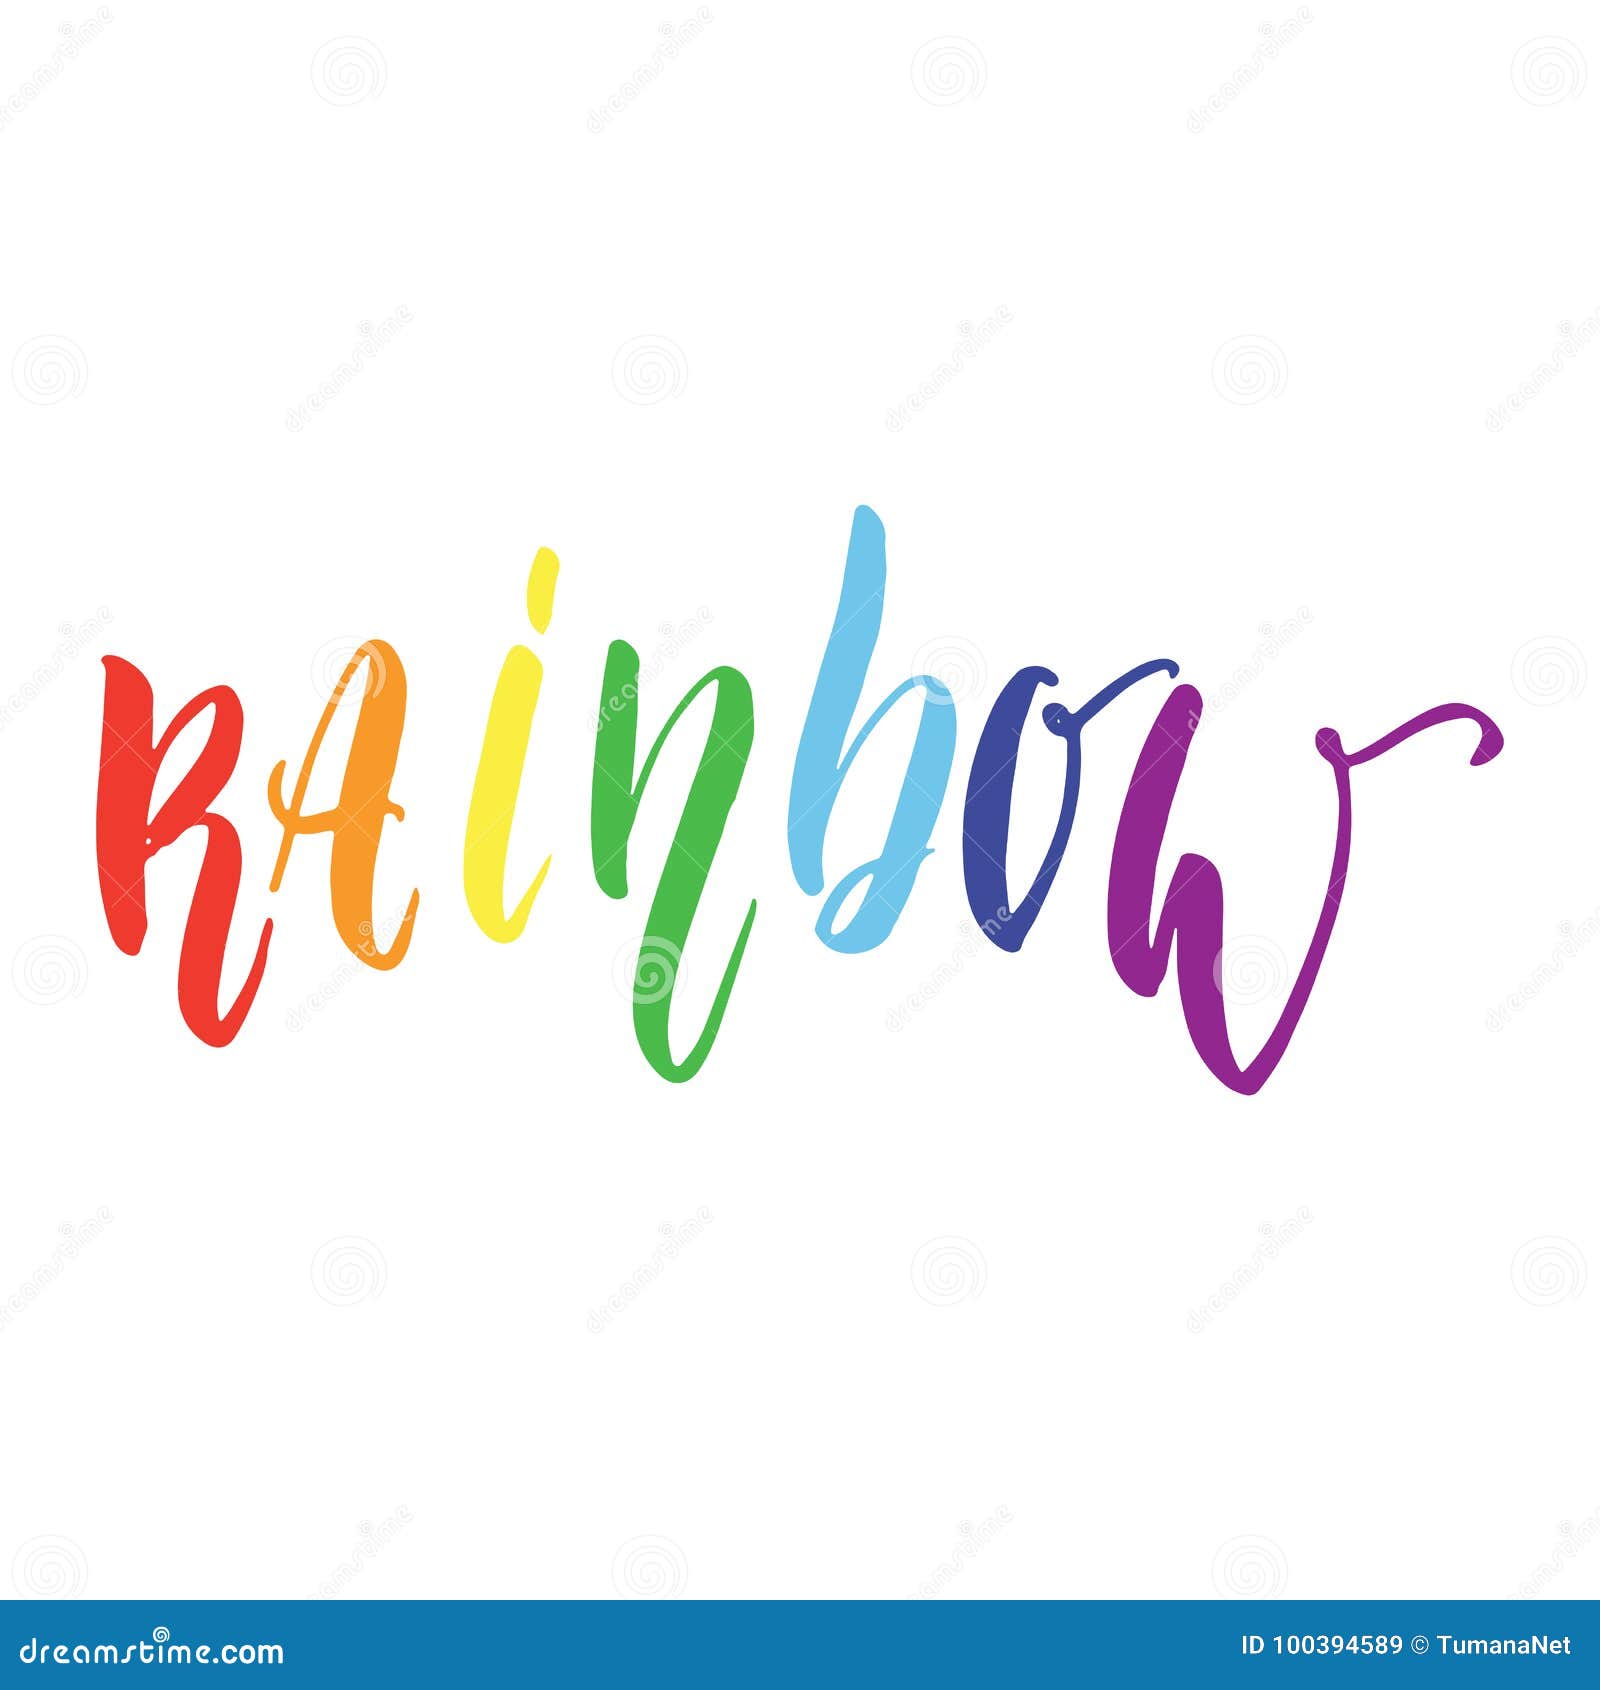 Rainbow Lgbt Slogan Hand Drawn Lettering Quote With